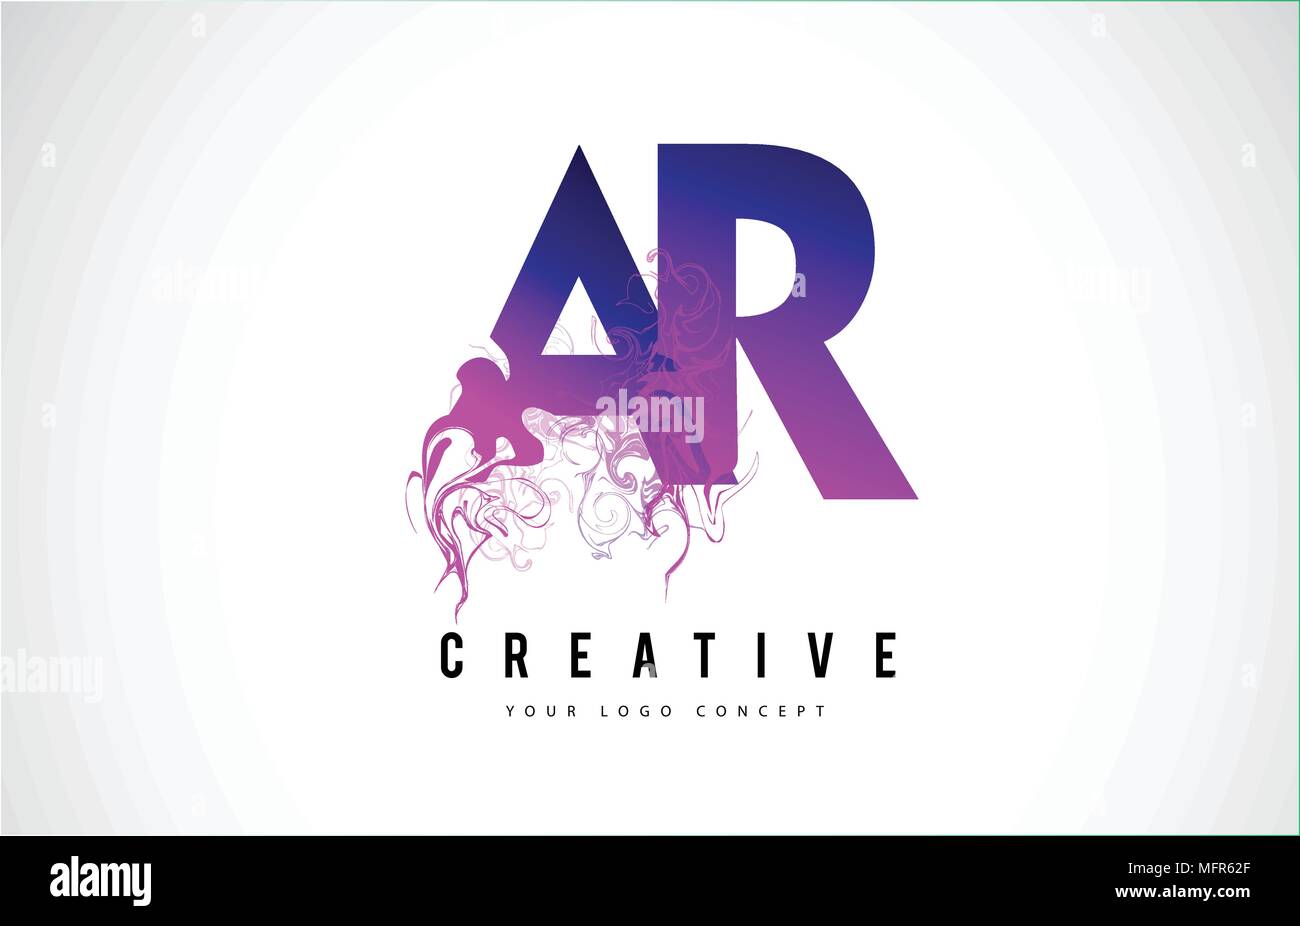 AR A R Purple Letter Logo Design with Creative Liquid Effect Flowing Vector Illustration. Stock Vector